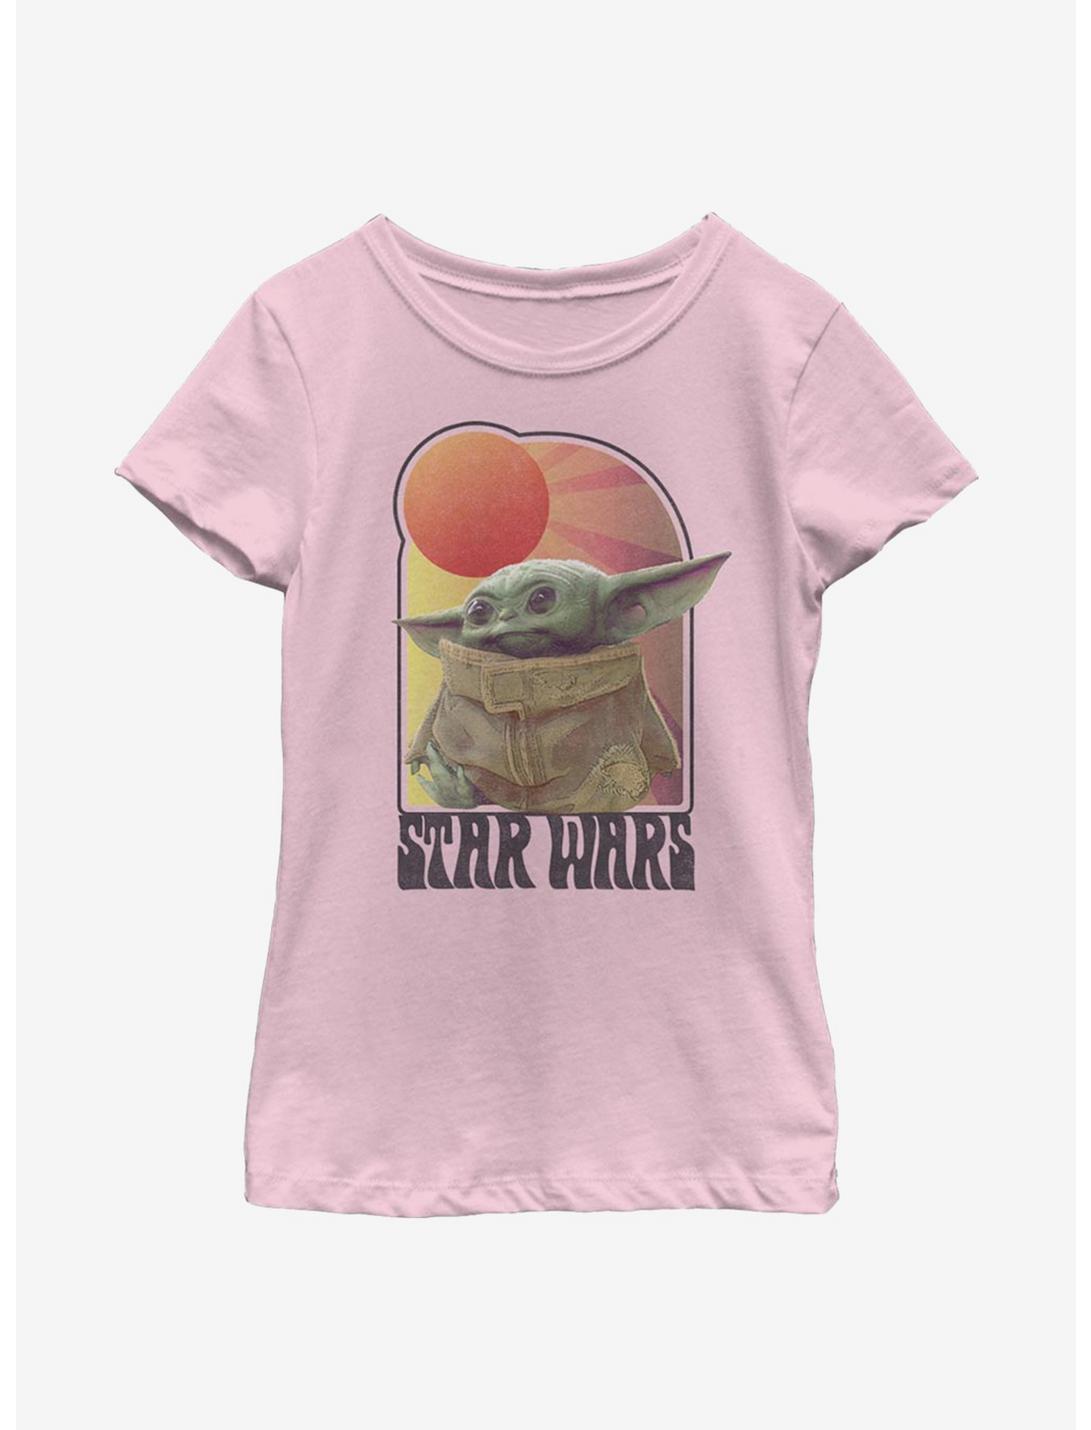 Star Wars The Mandalorian Vintage The Child Youth Girls T-Shirt, PINK, hi-res